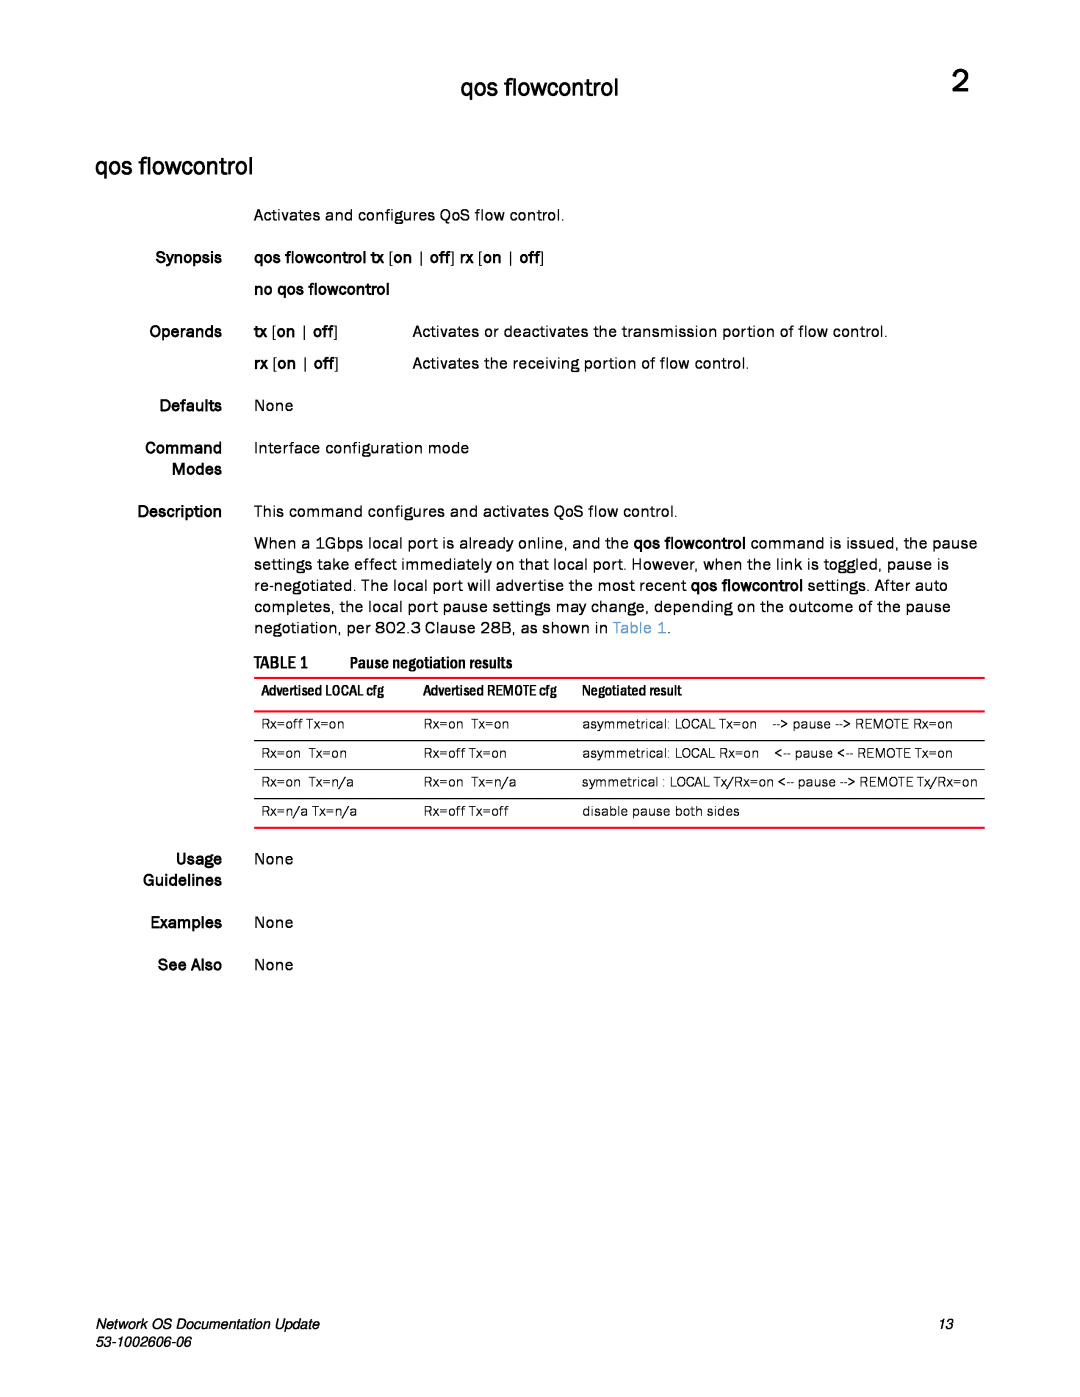 Brocade Communications Systems 2.1 manual qos flowcontrol, Advertised LOCAL cfg, Advertised REMOTE cfg, Negotiated result 